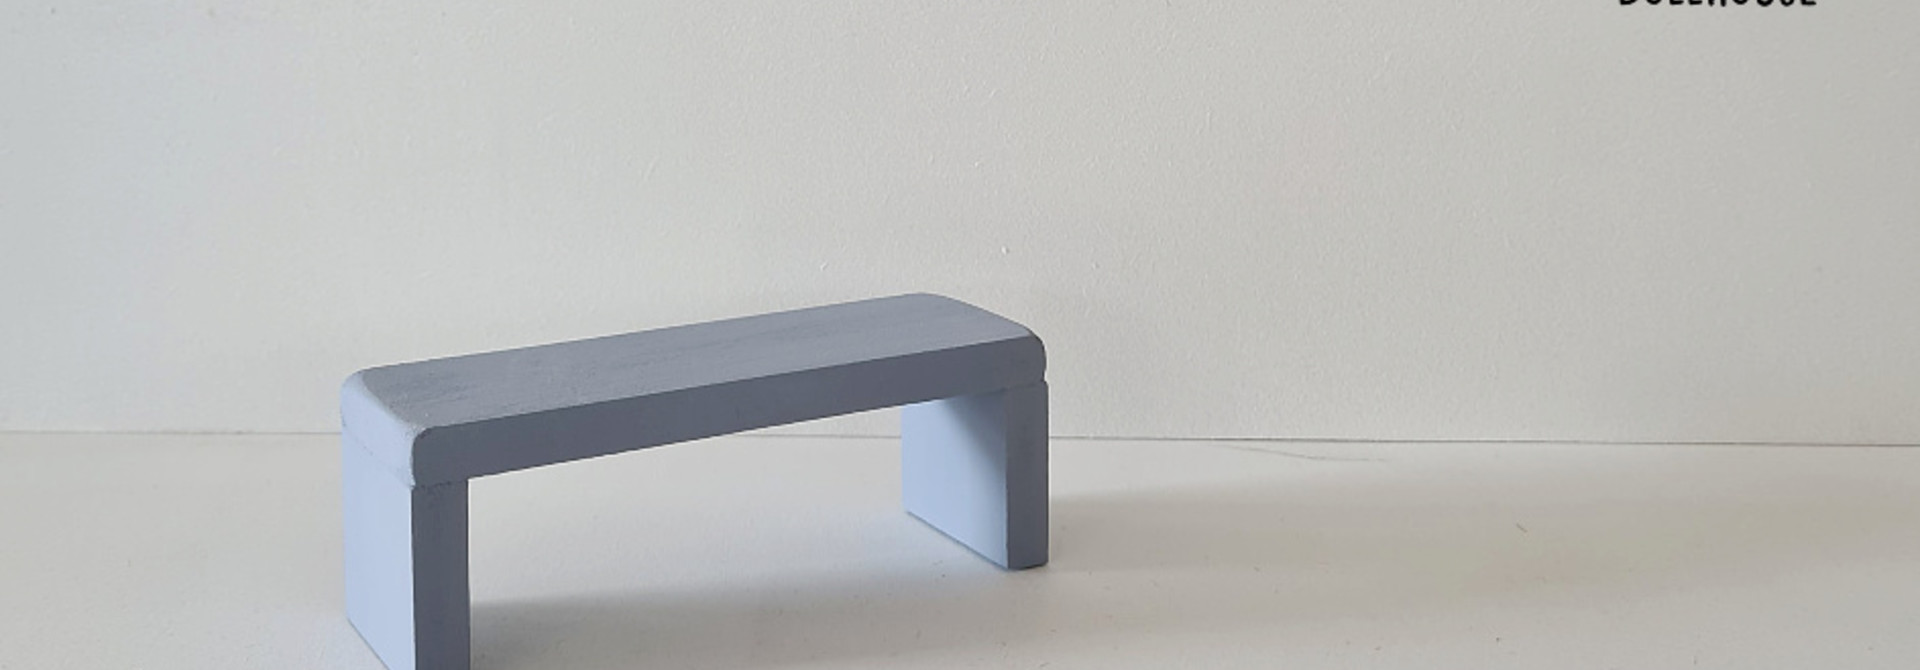 Side Table for Maileg Bed - Blurry Blue